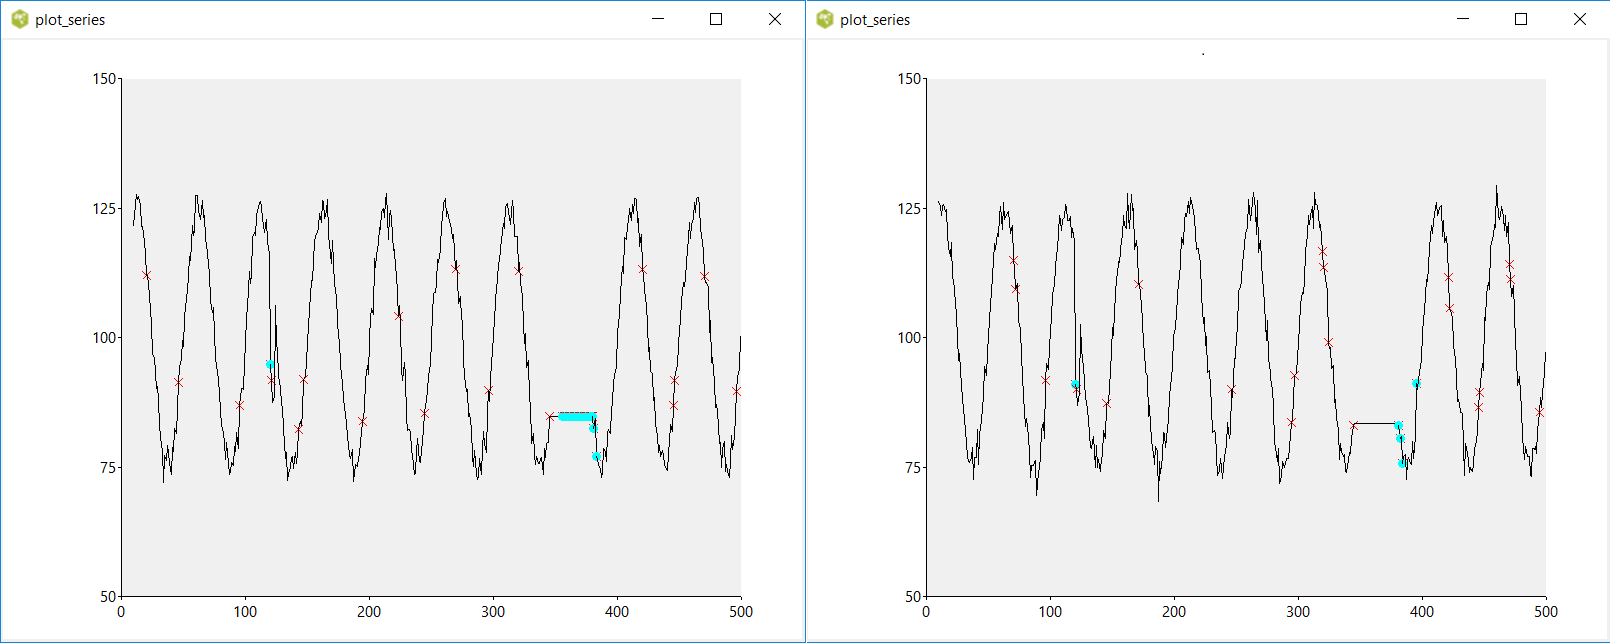 Detecting anomalies in a time series - screenshot